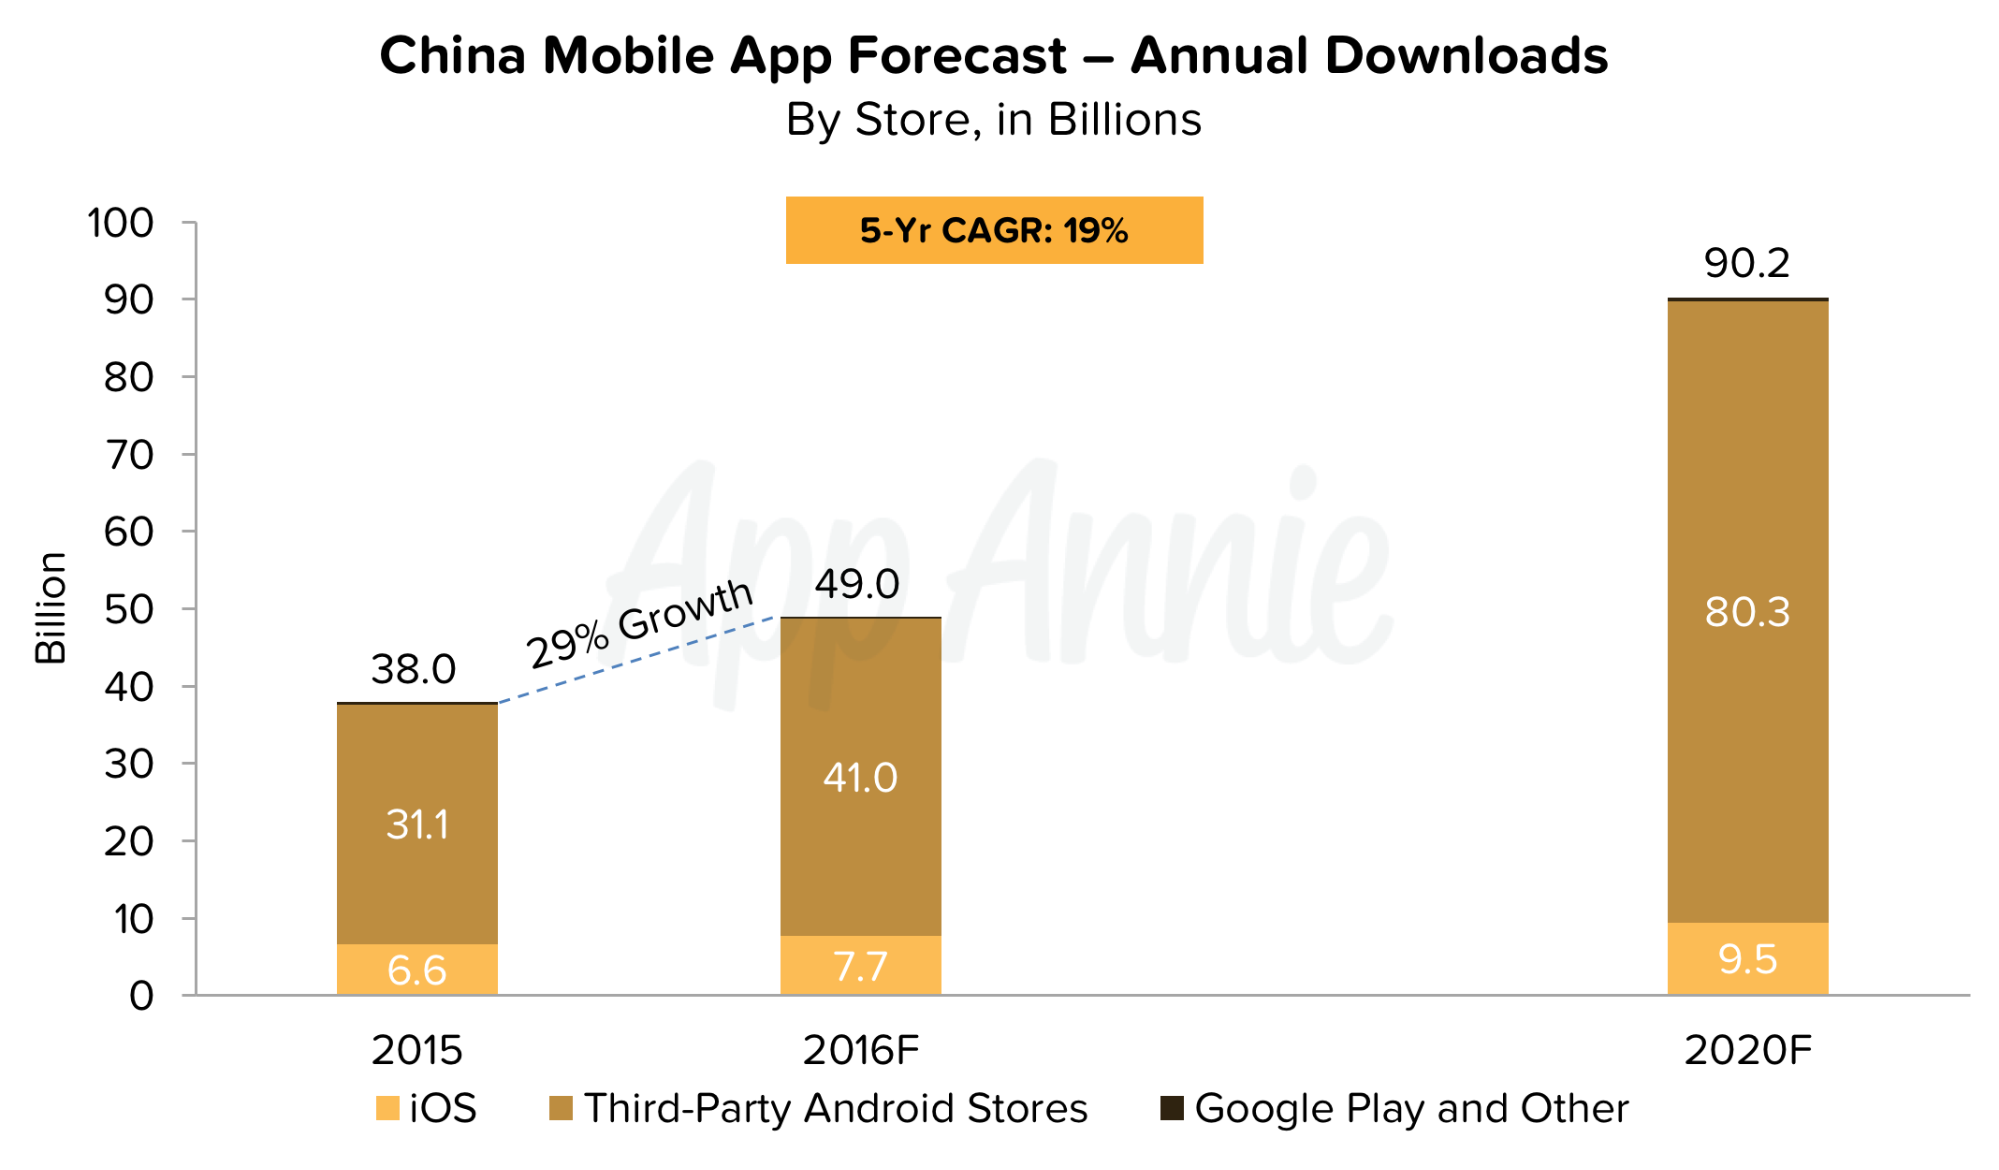 China Mobile App Forecast Annual Downloads